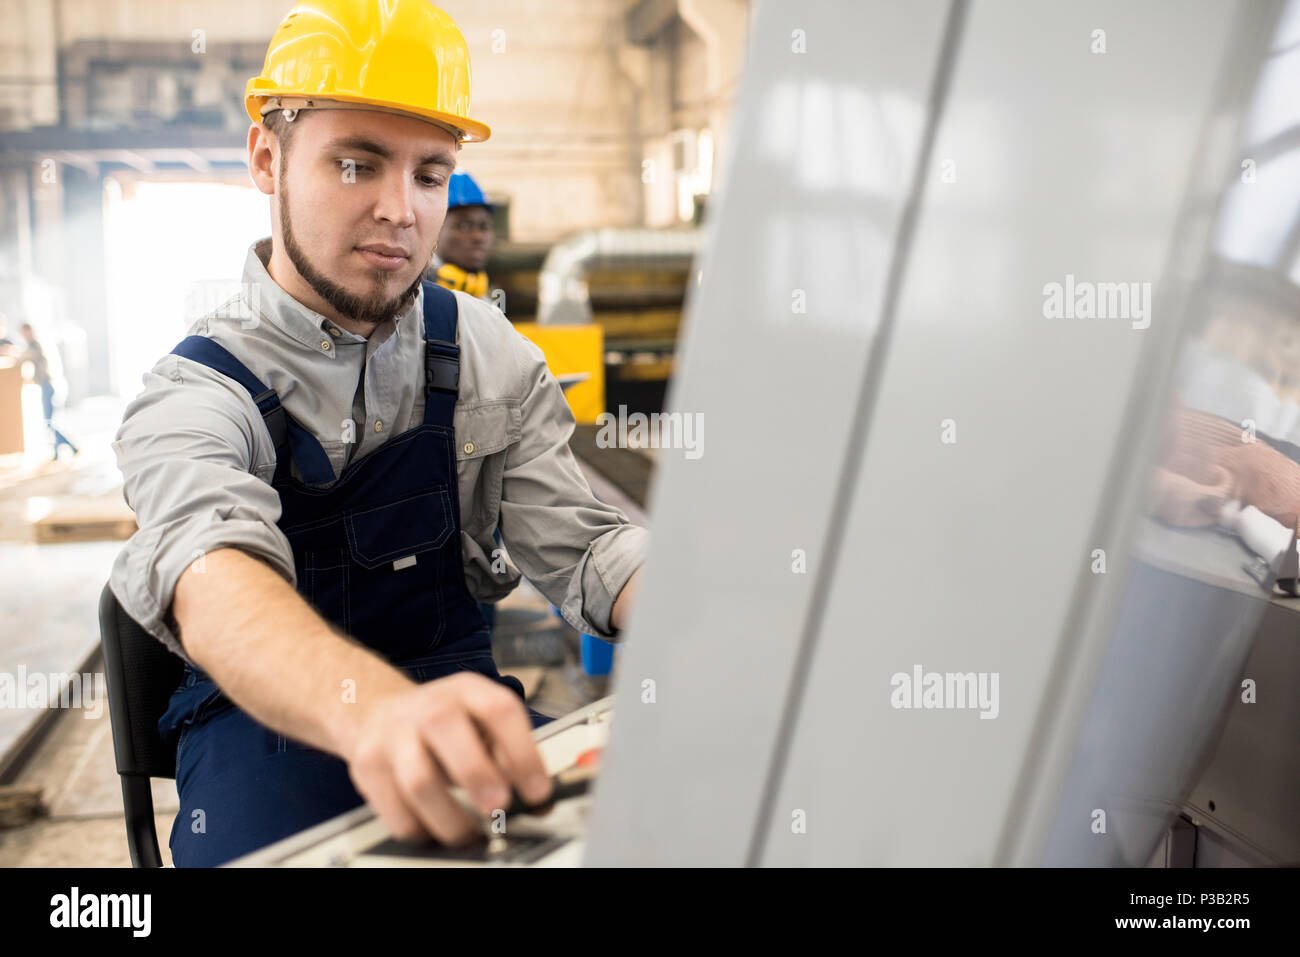 Concentrated worker operating manufacturing machine Stock Photo